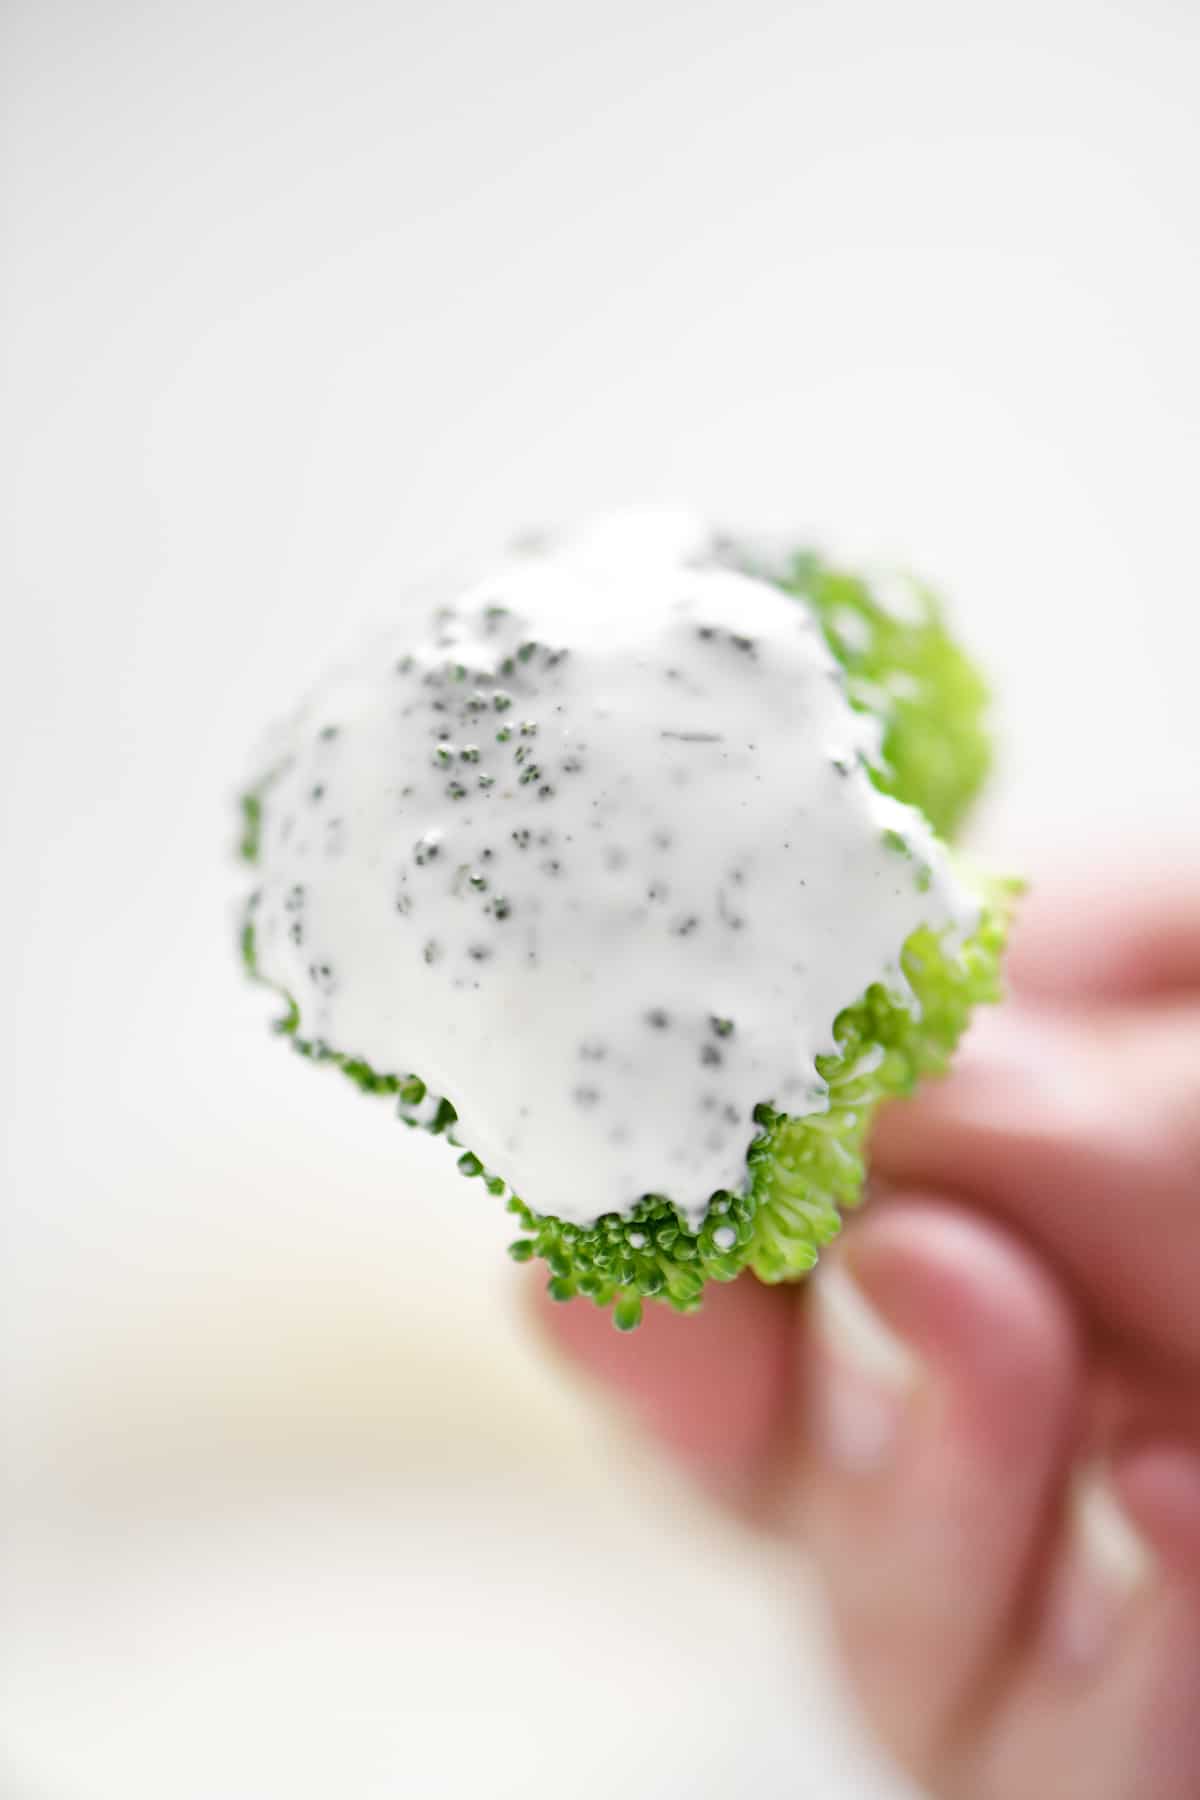 broccoli dipped in homemade ranch dressing